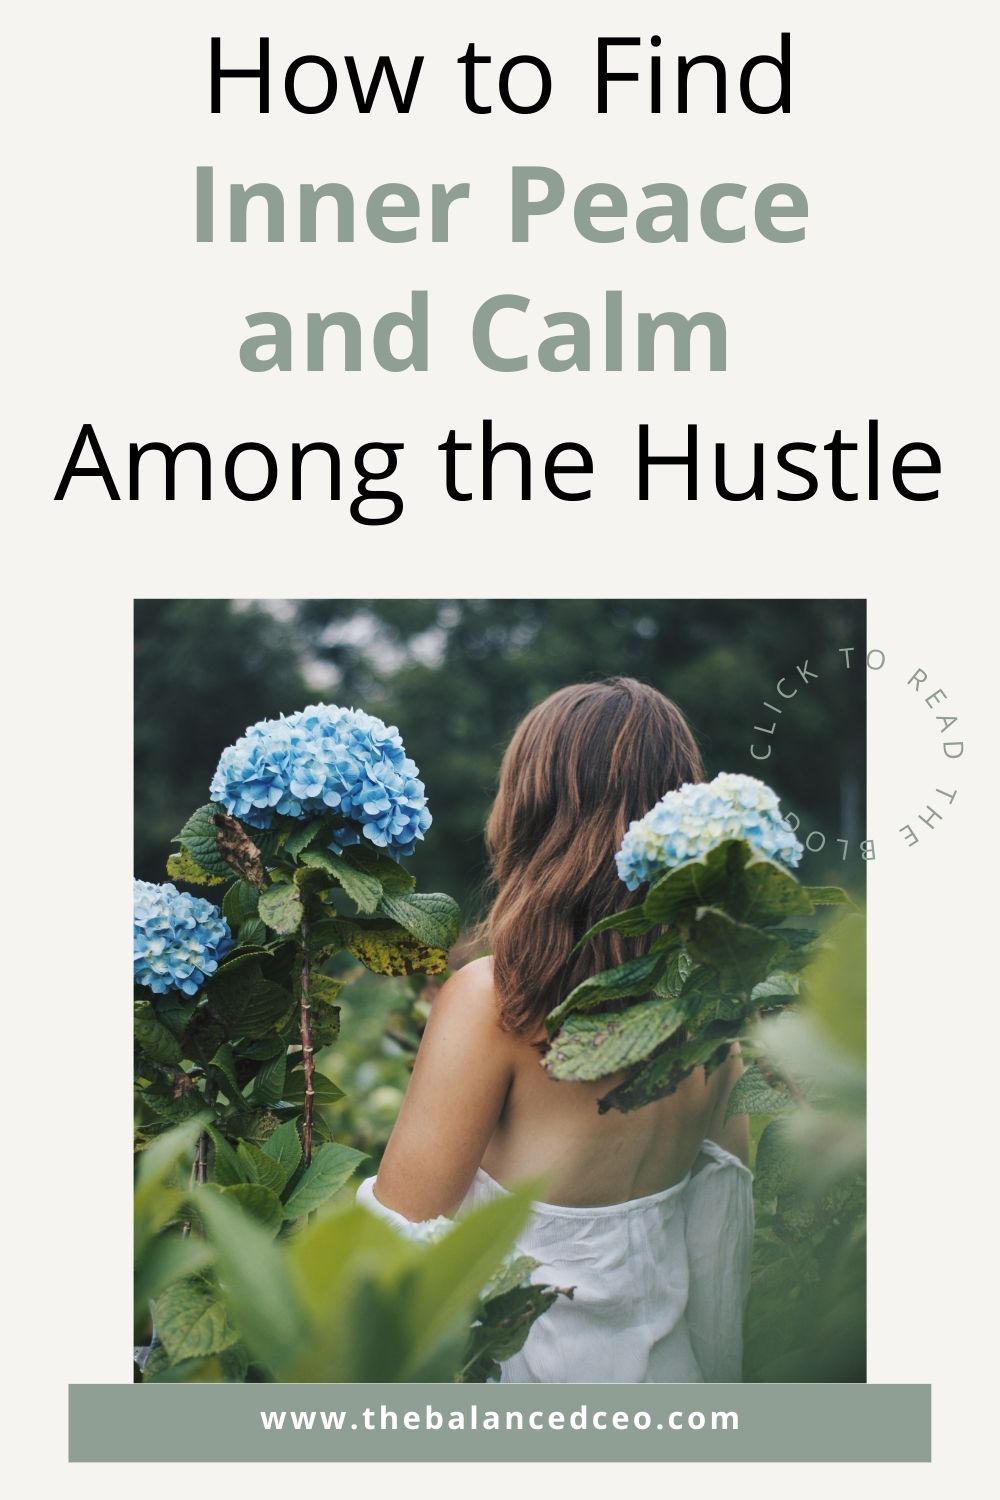 How to Find Inner Peace and Calm Among the Hustle